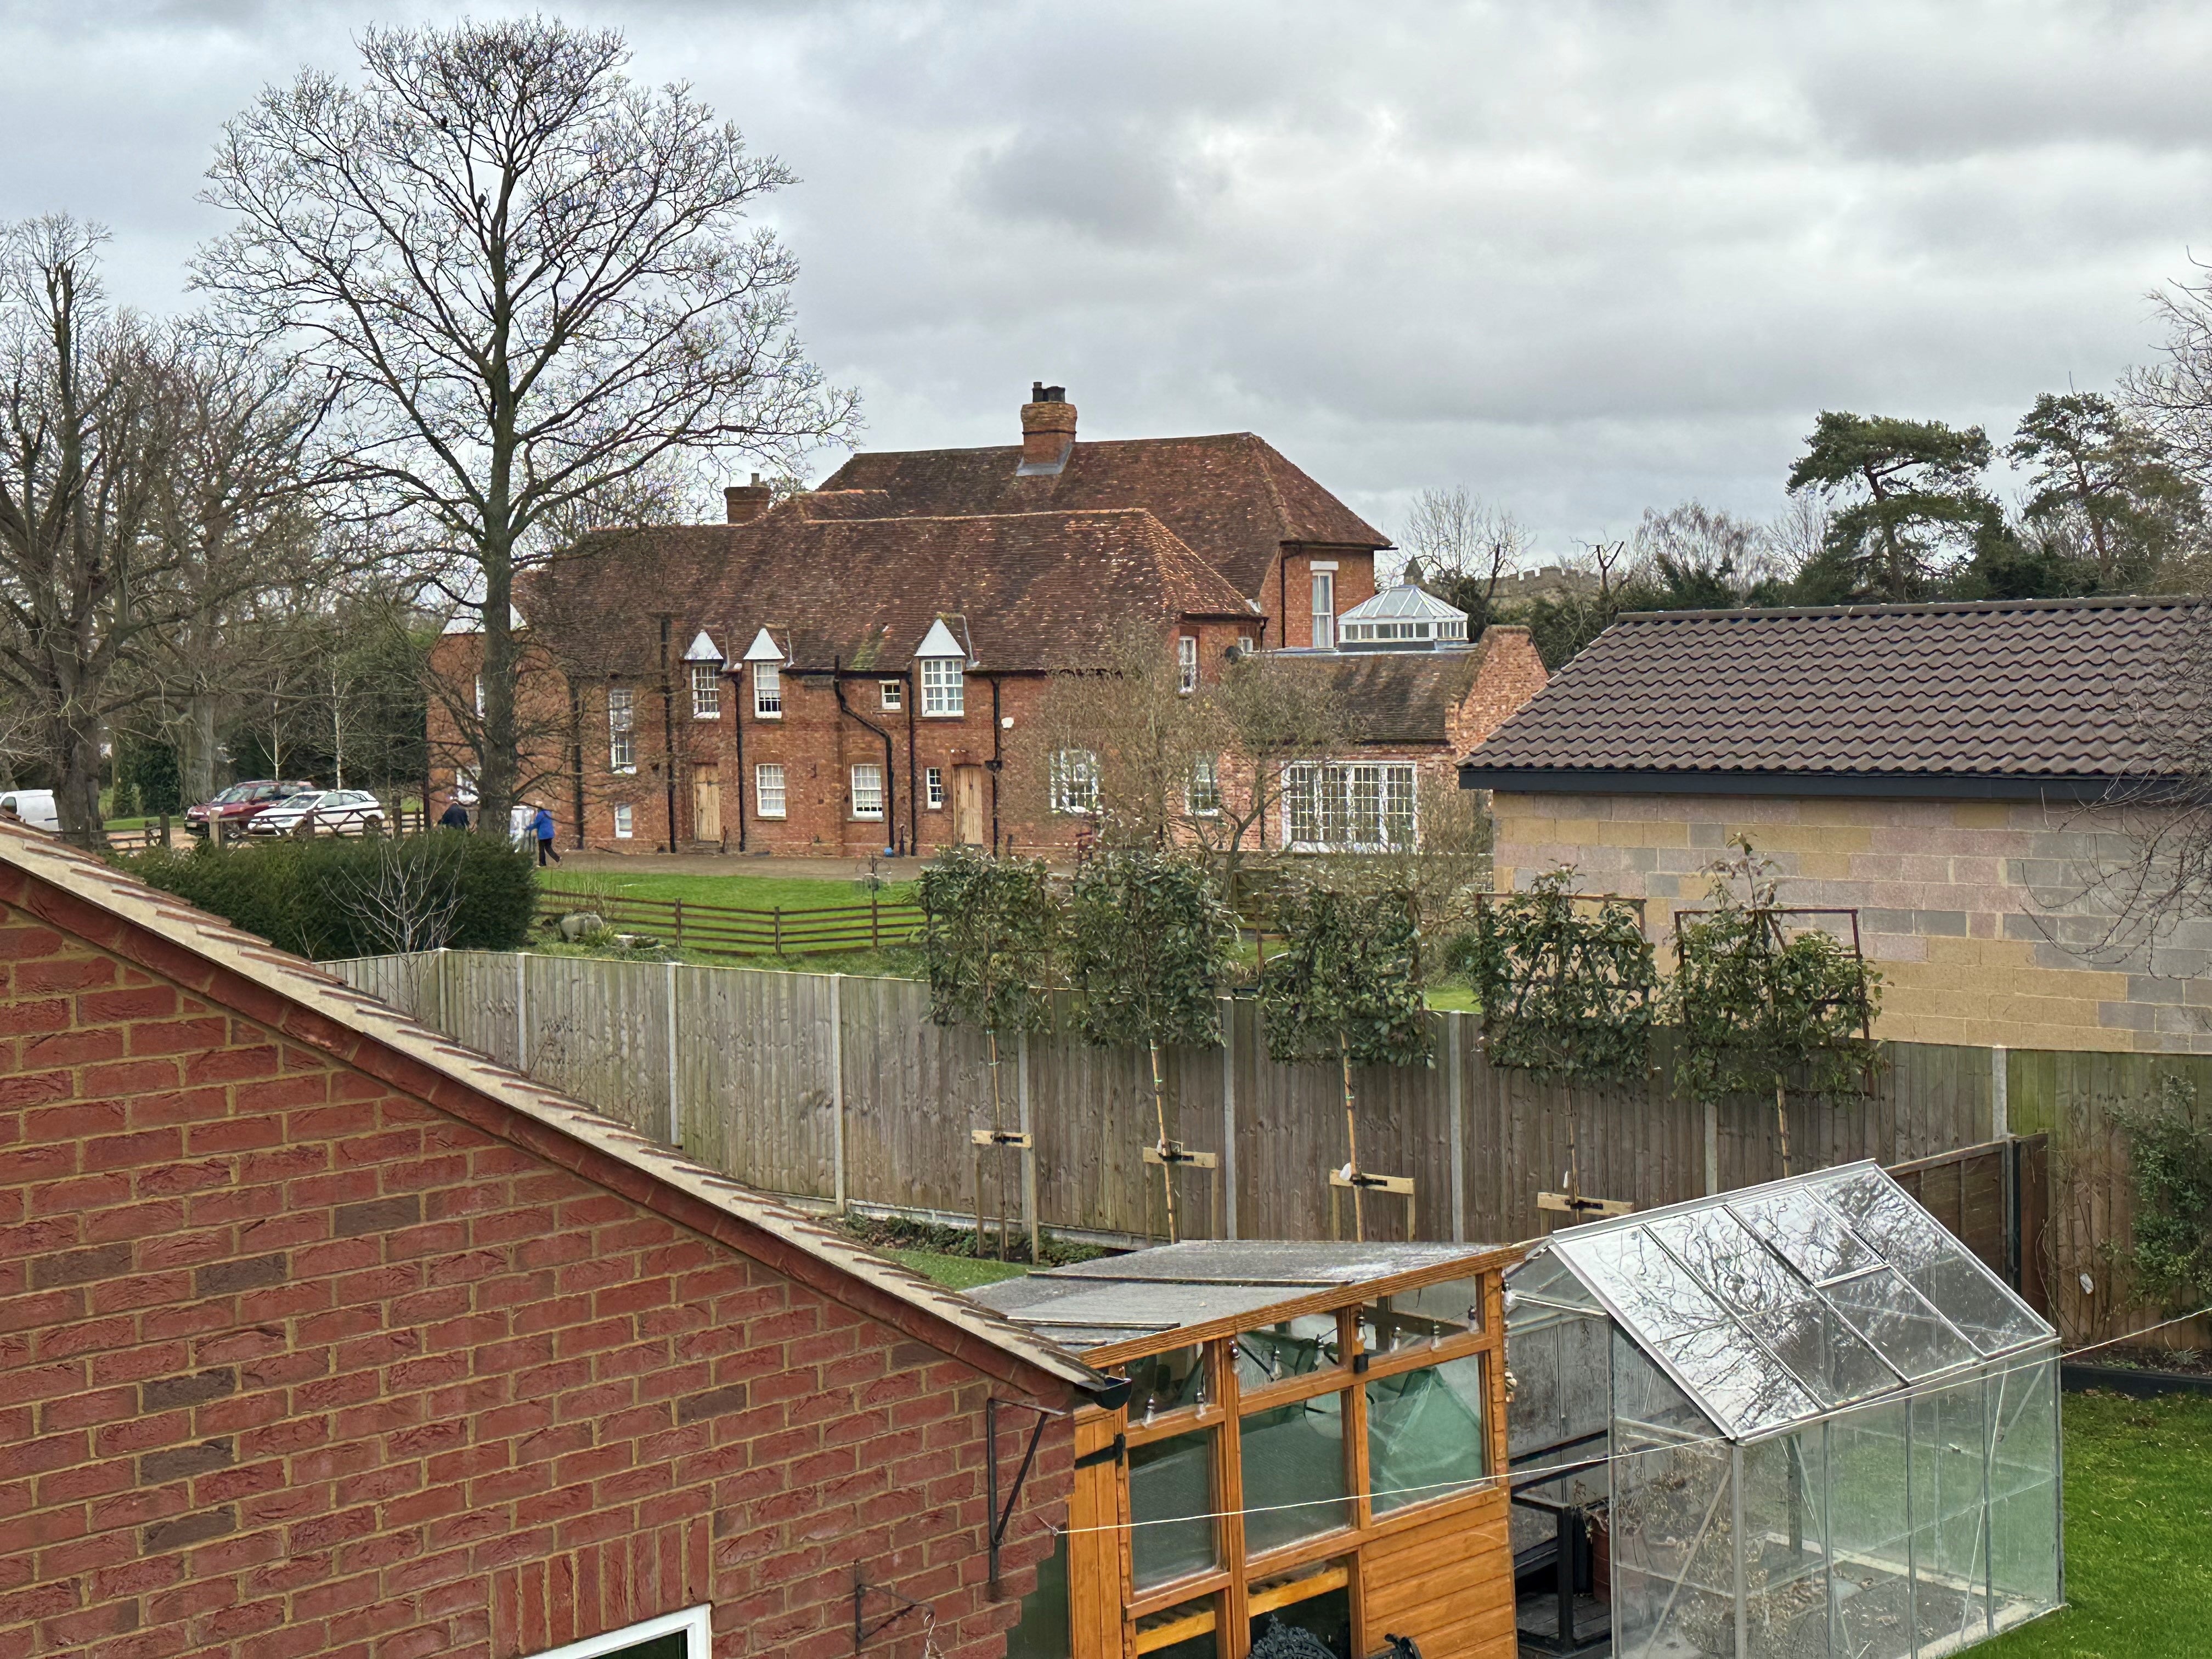 The view of the building (on the right) behind garden fences facing The Old Rectory